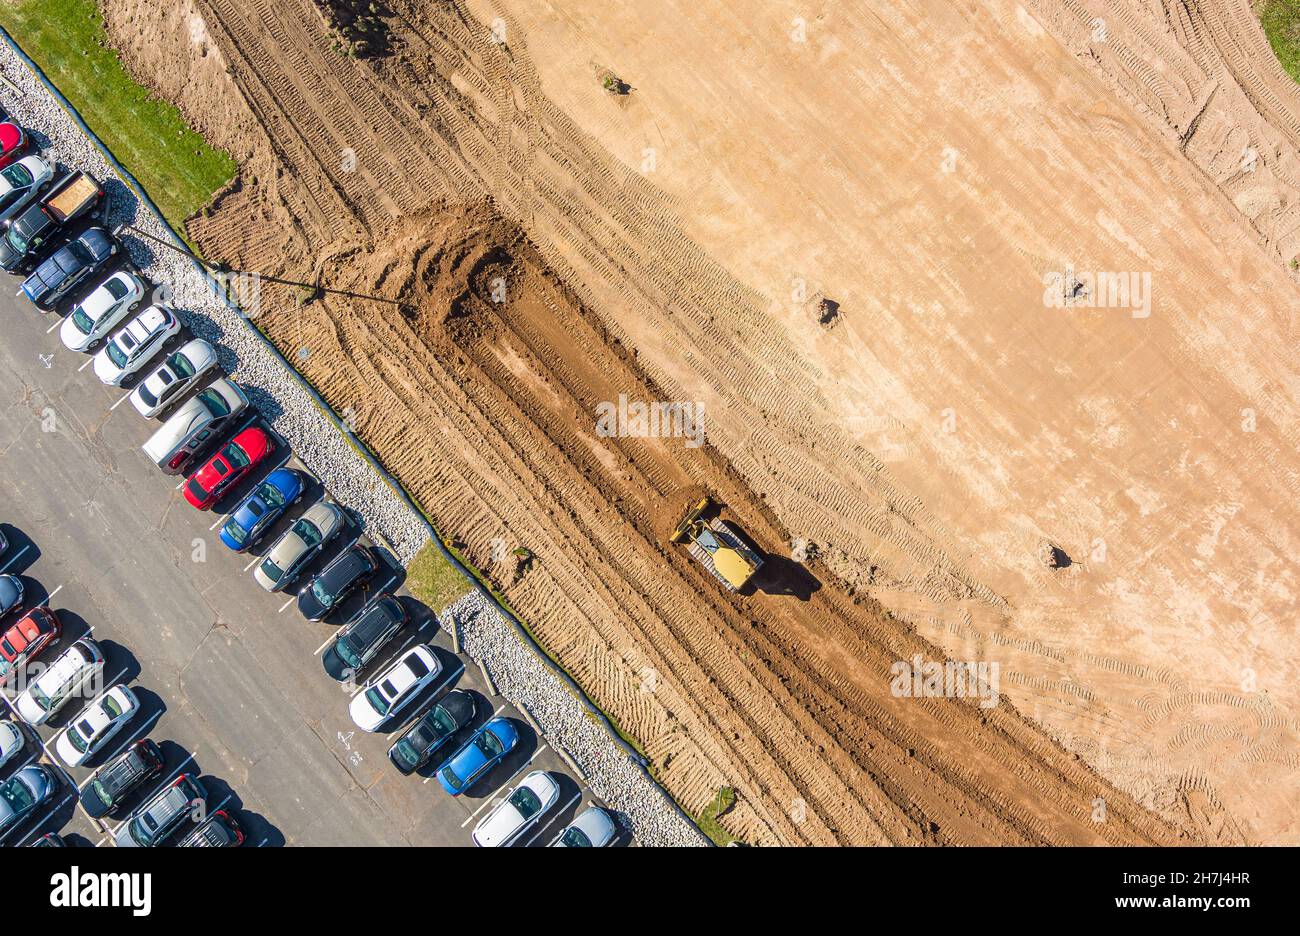 Aerial view of parking lot carpark expansion, Pennsylvania, USA Stock Photo